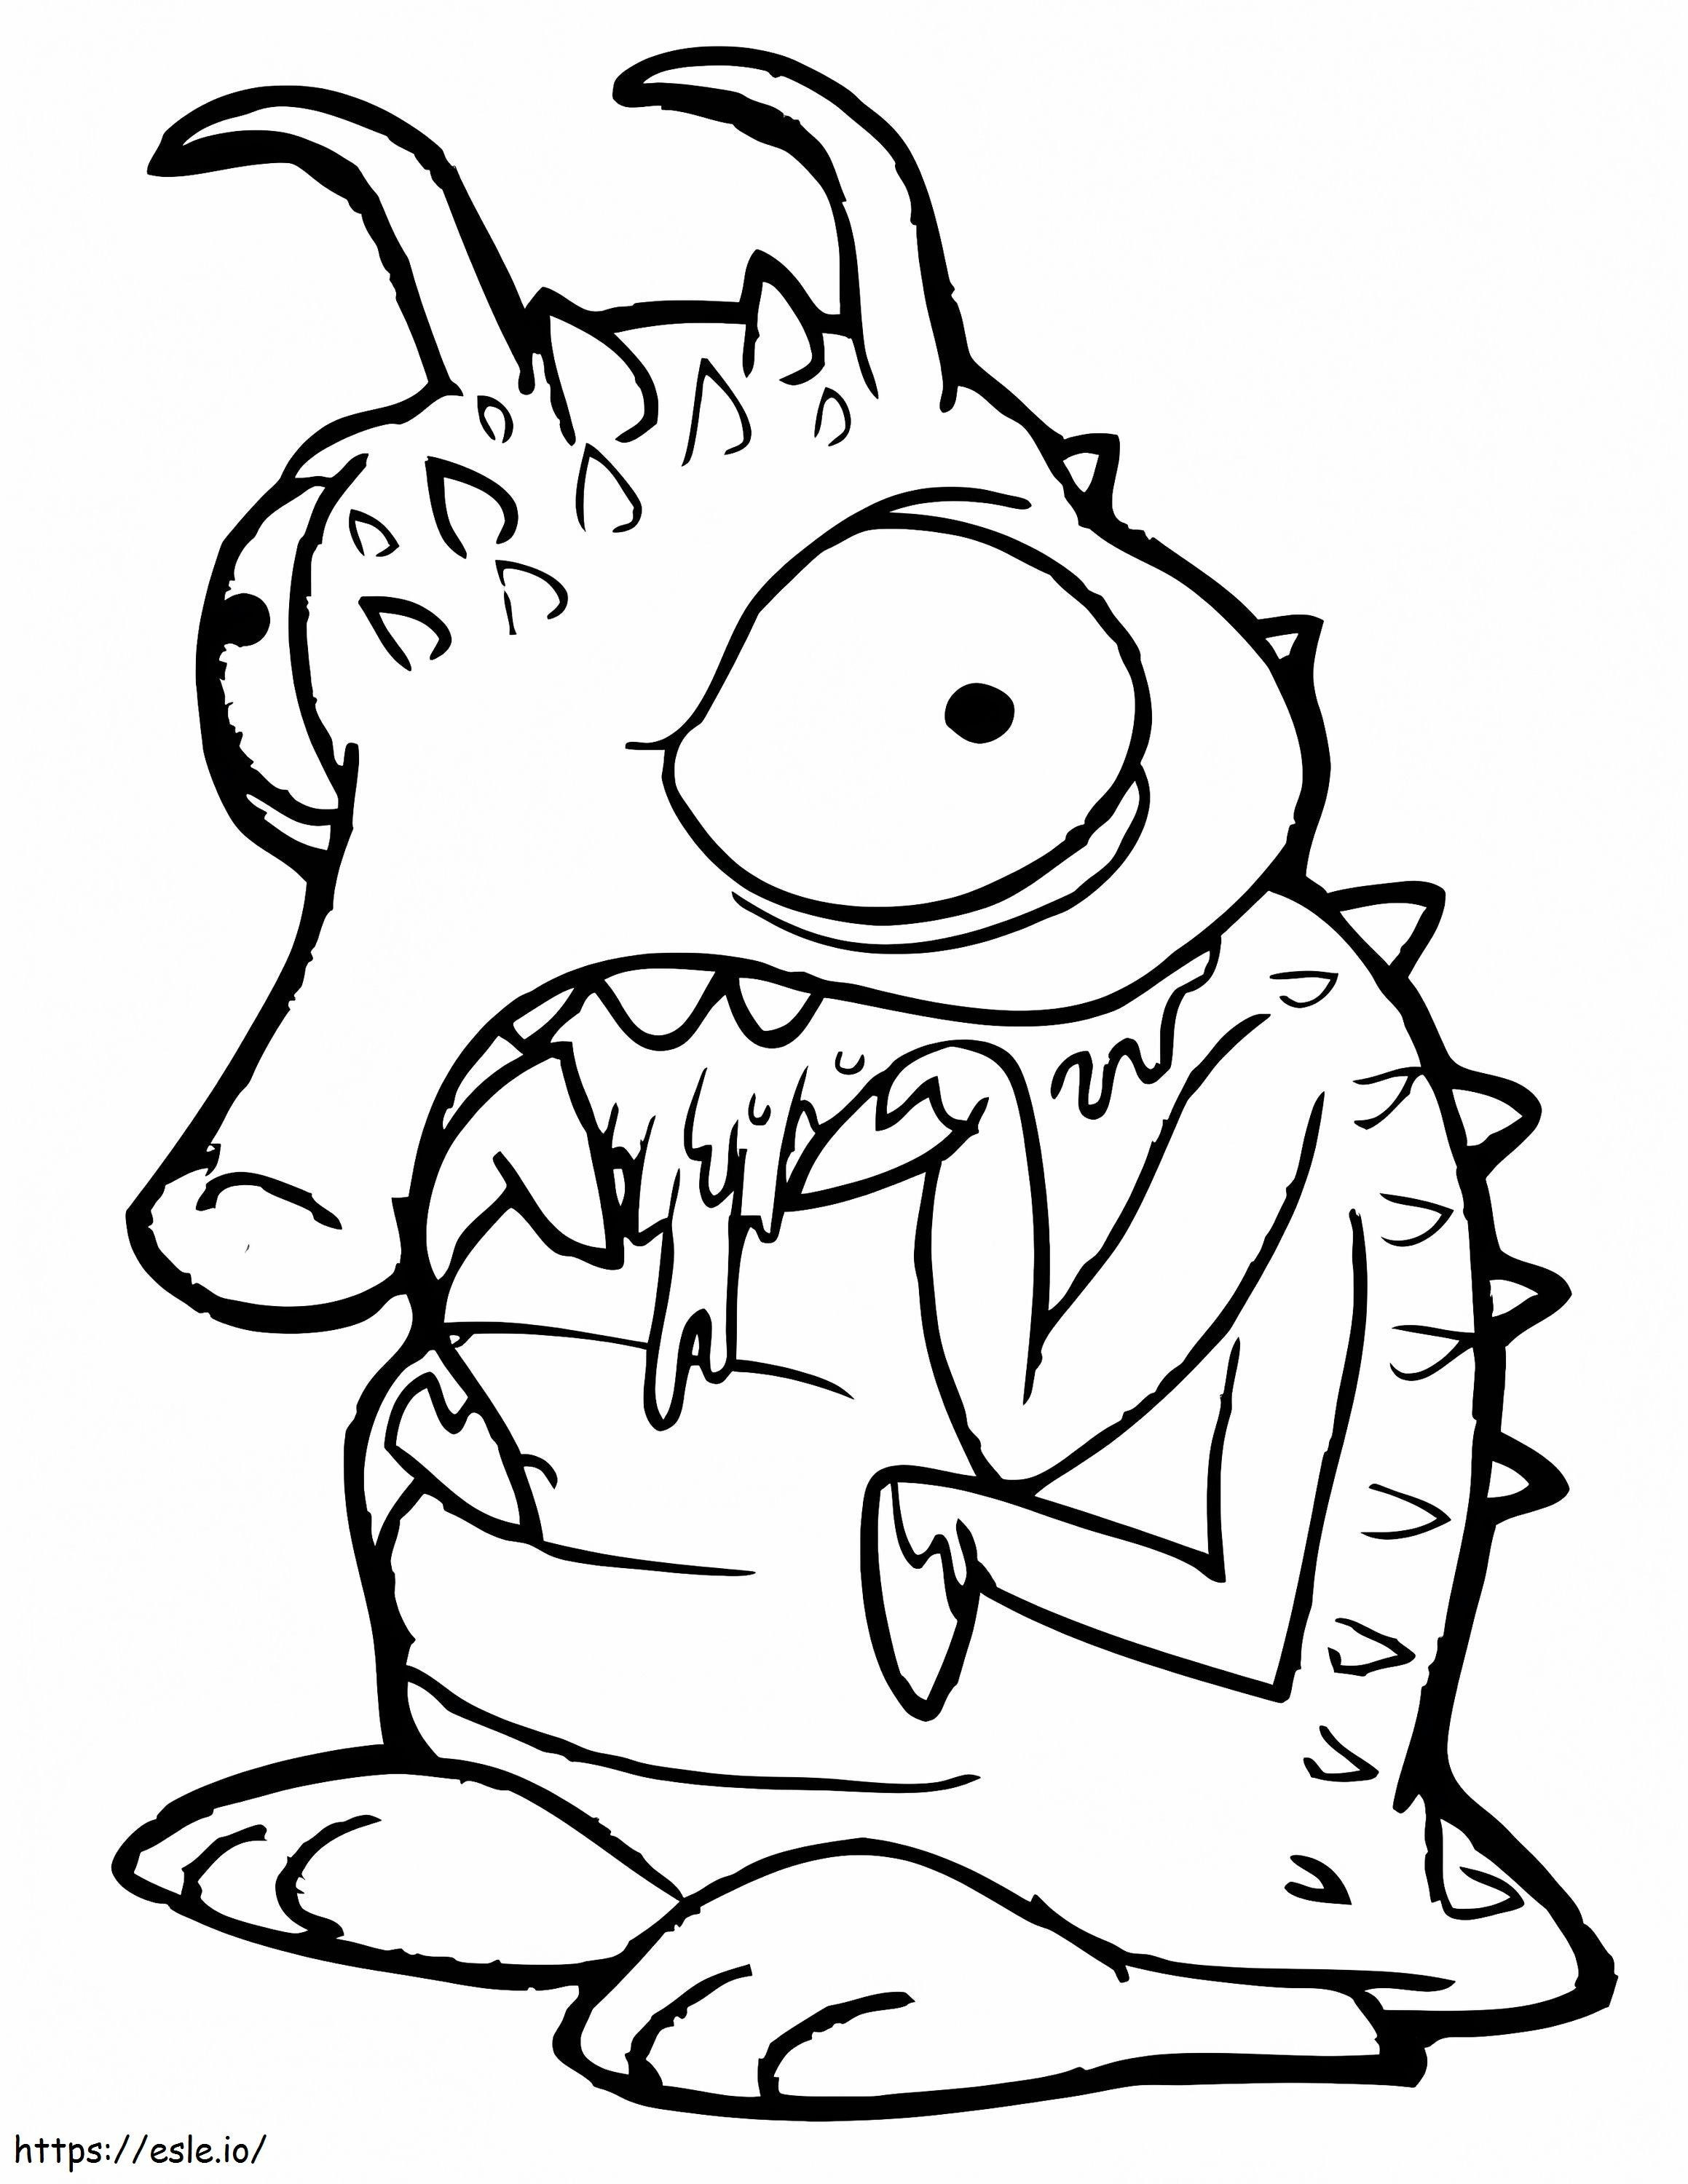 Skweevil The Trash Pack coloring page